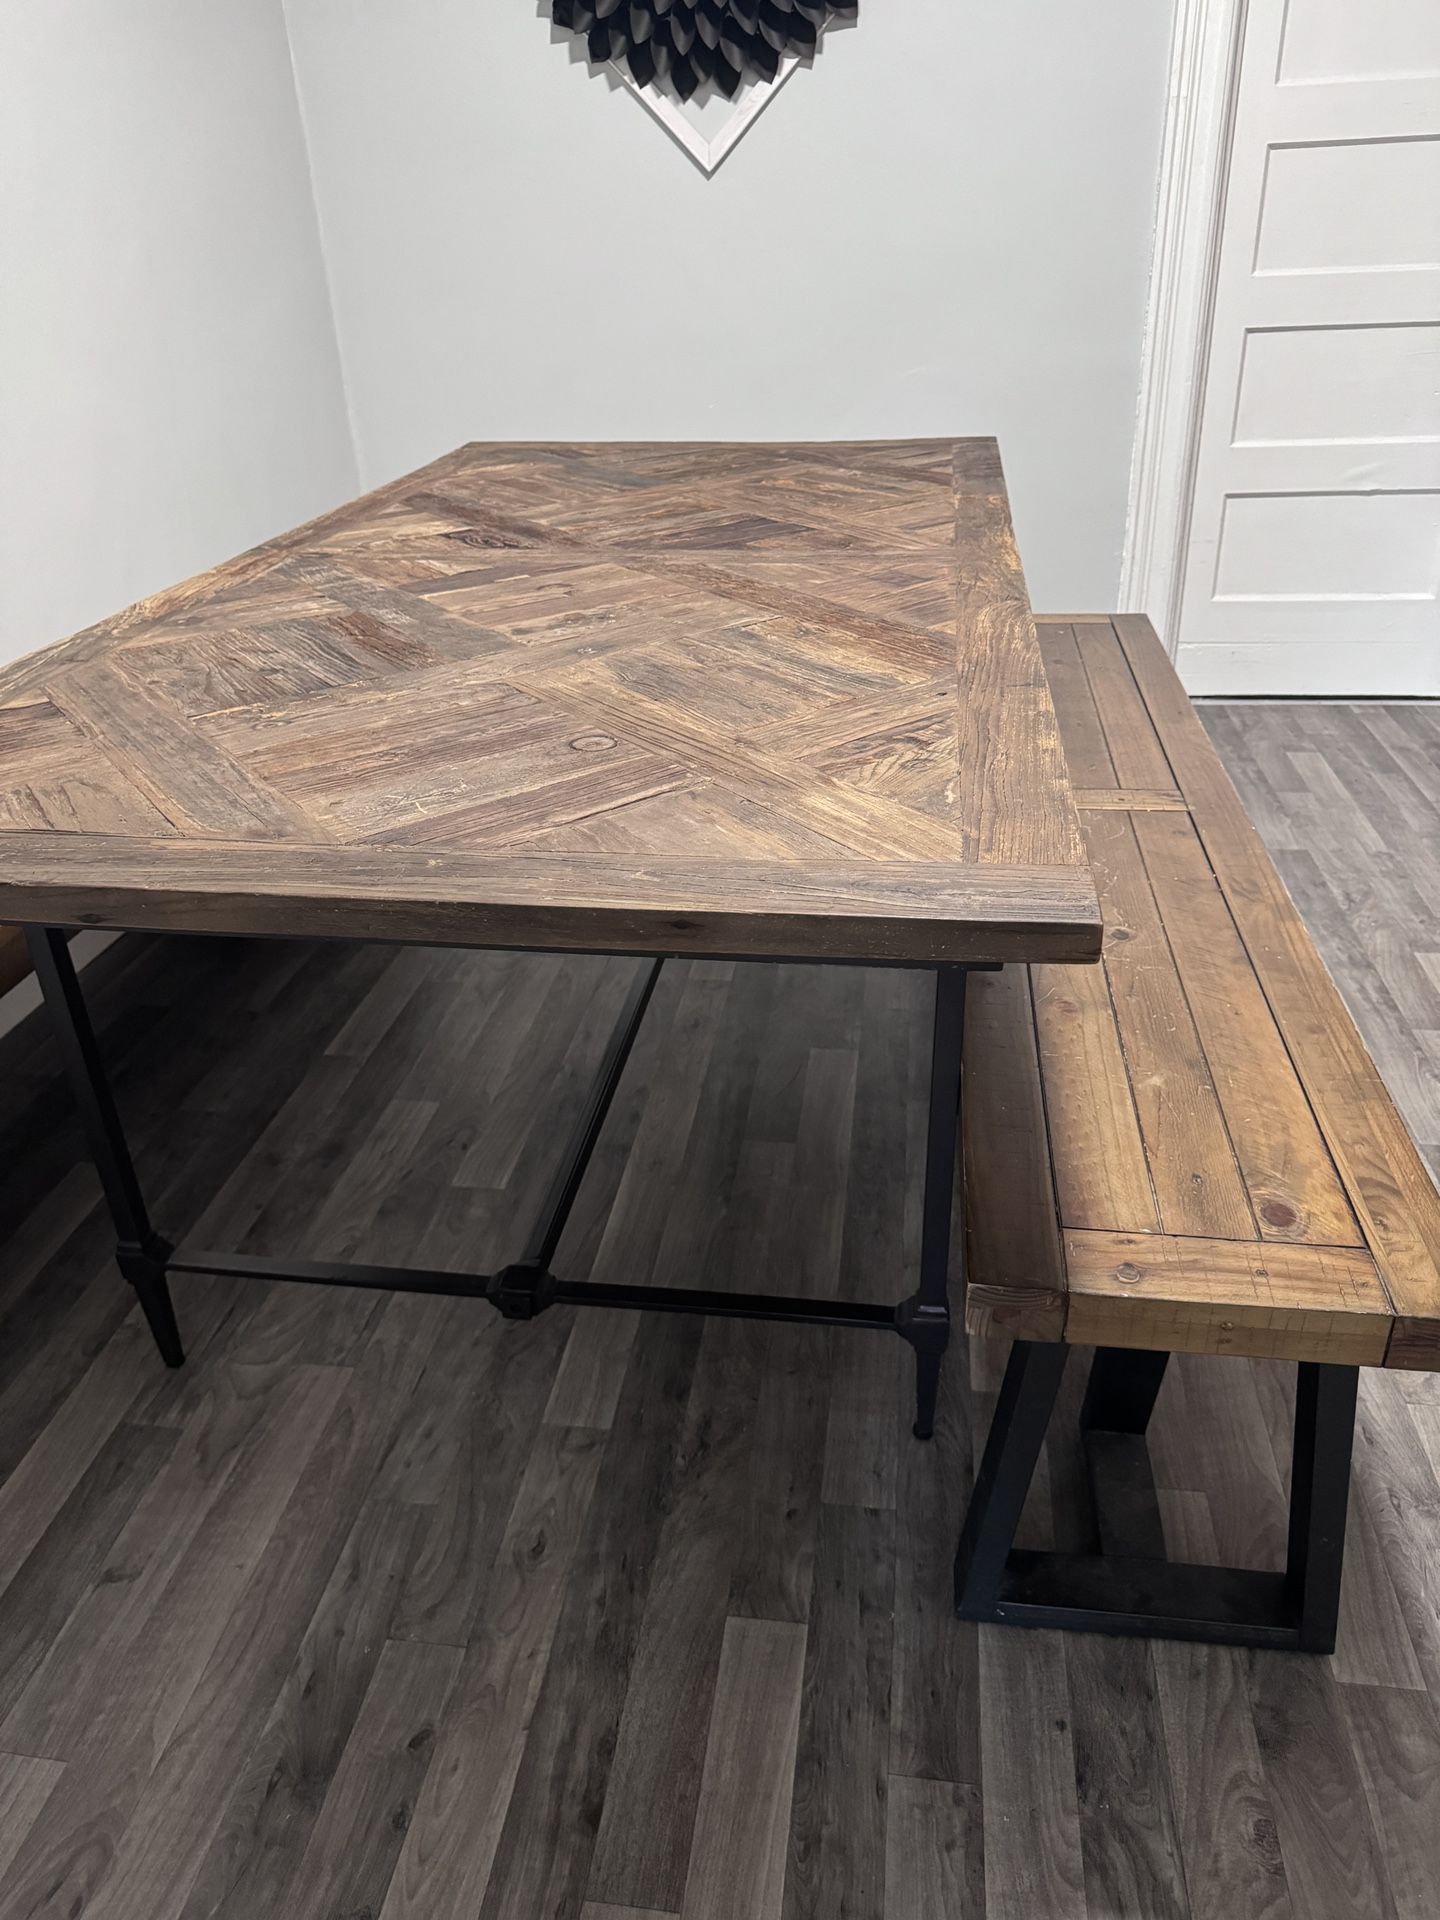 Pottery Barn Dining Table 